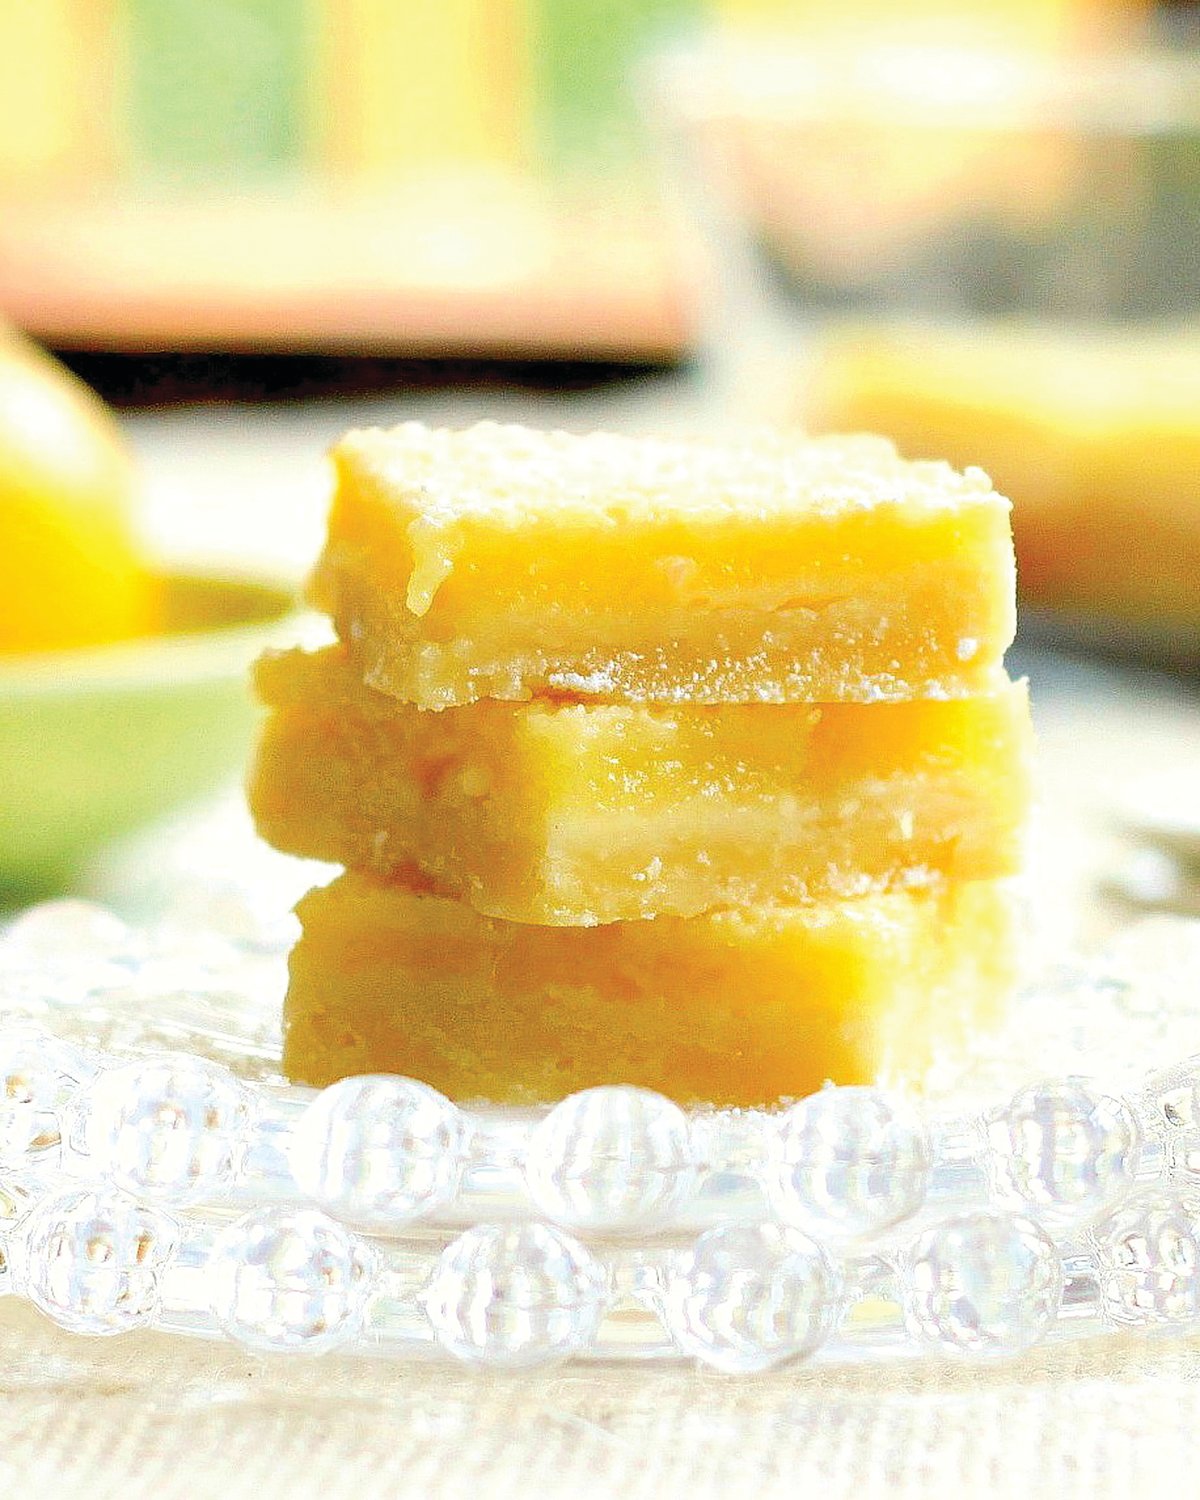 Early spring is high season for lemons, and these bars will bring a warming ray of sunshine to your plate.